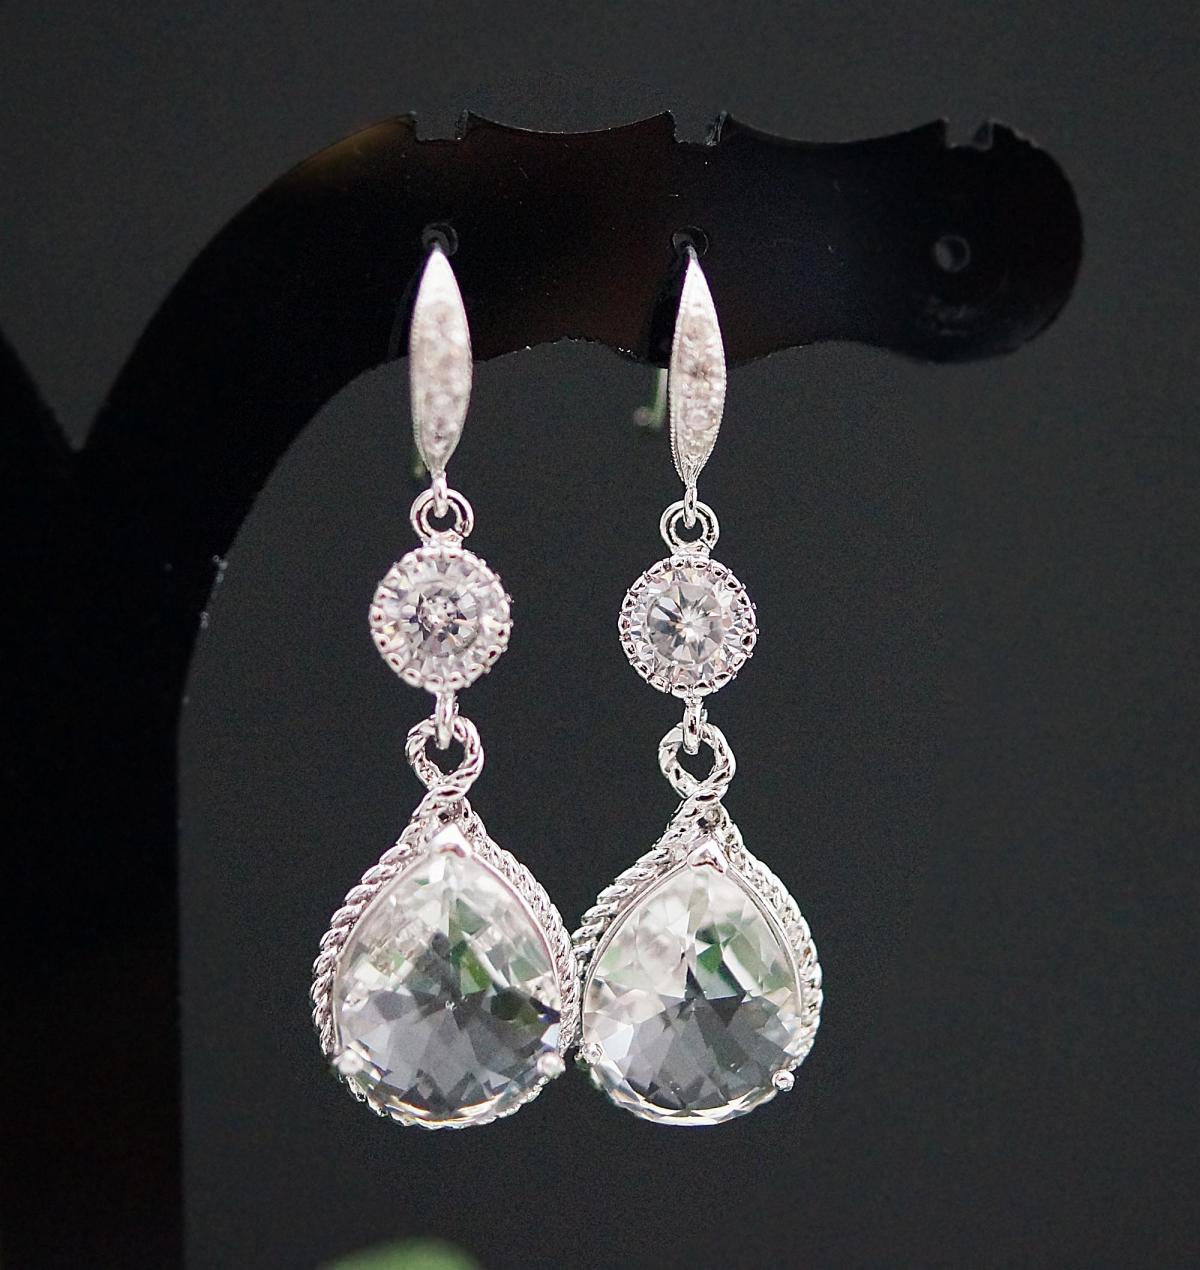 Wedding Jewelry Bridal Earrings Bridesmaid Earrings Cubic Zirconia Ear Wires With Clear Glass Rhodium Trimmed Pear Cut Earrings